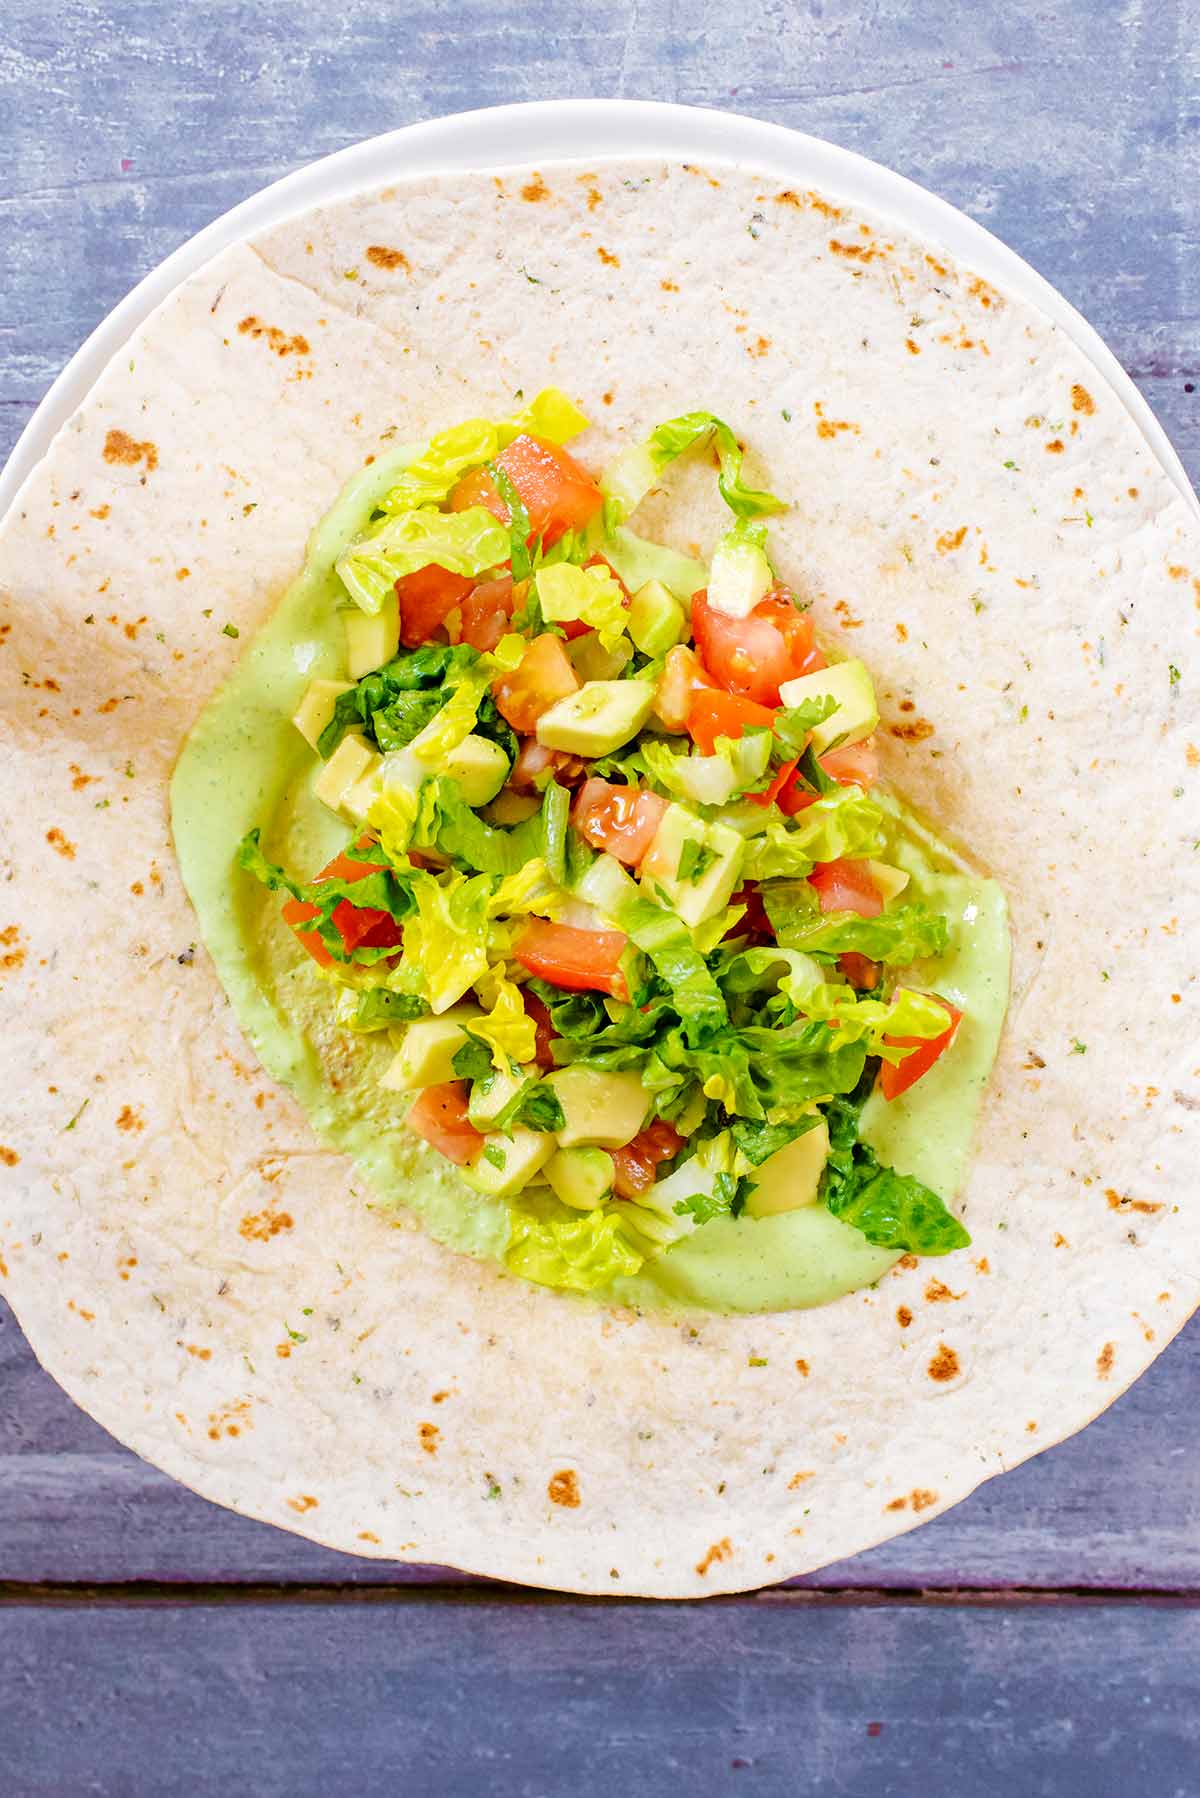 A tortilla wrap with green sauce and chopped salad.